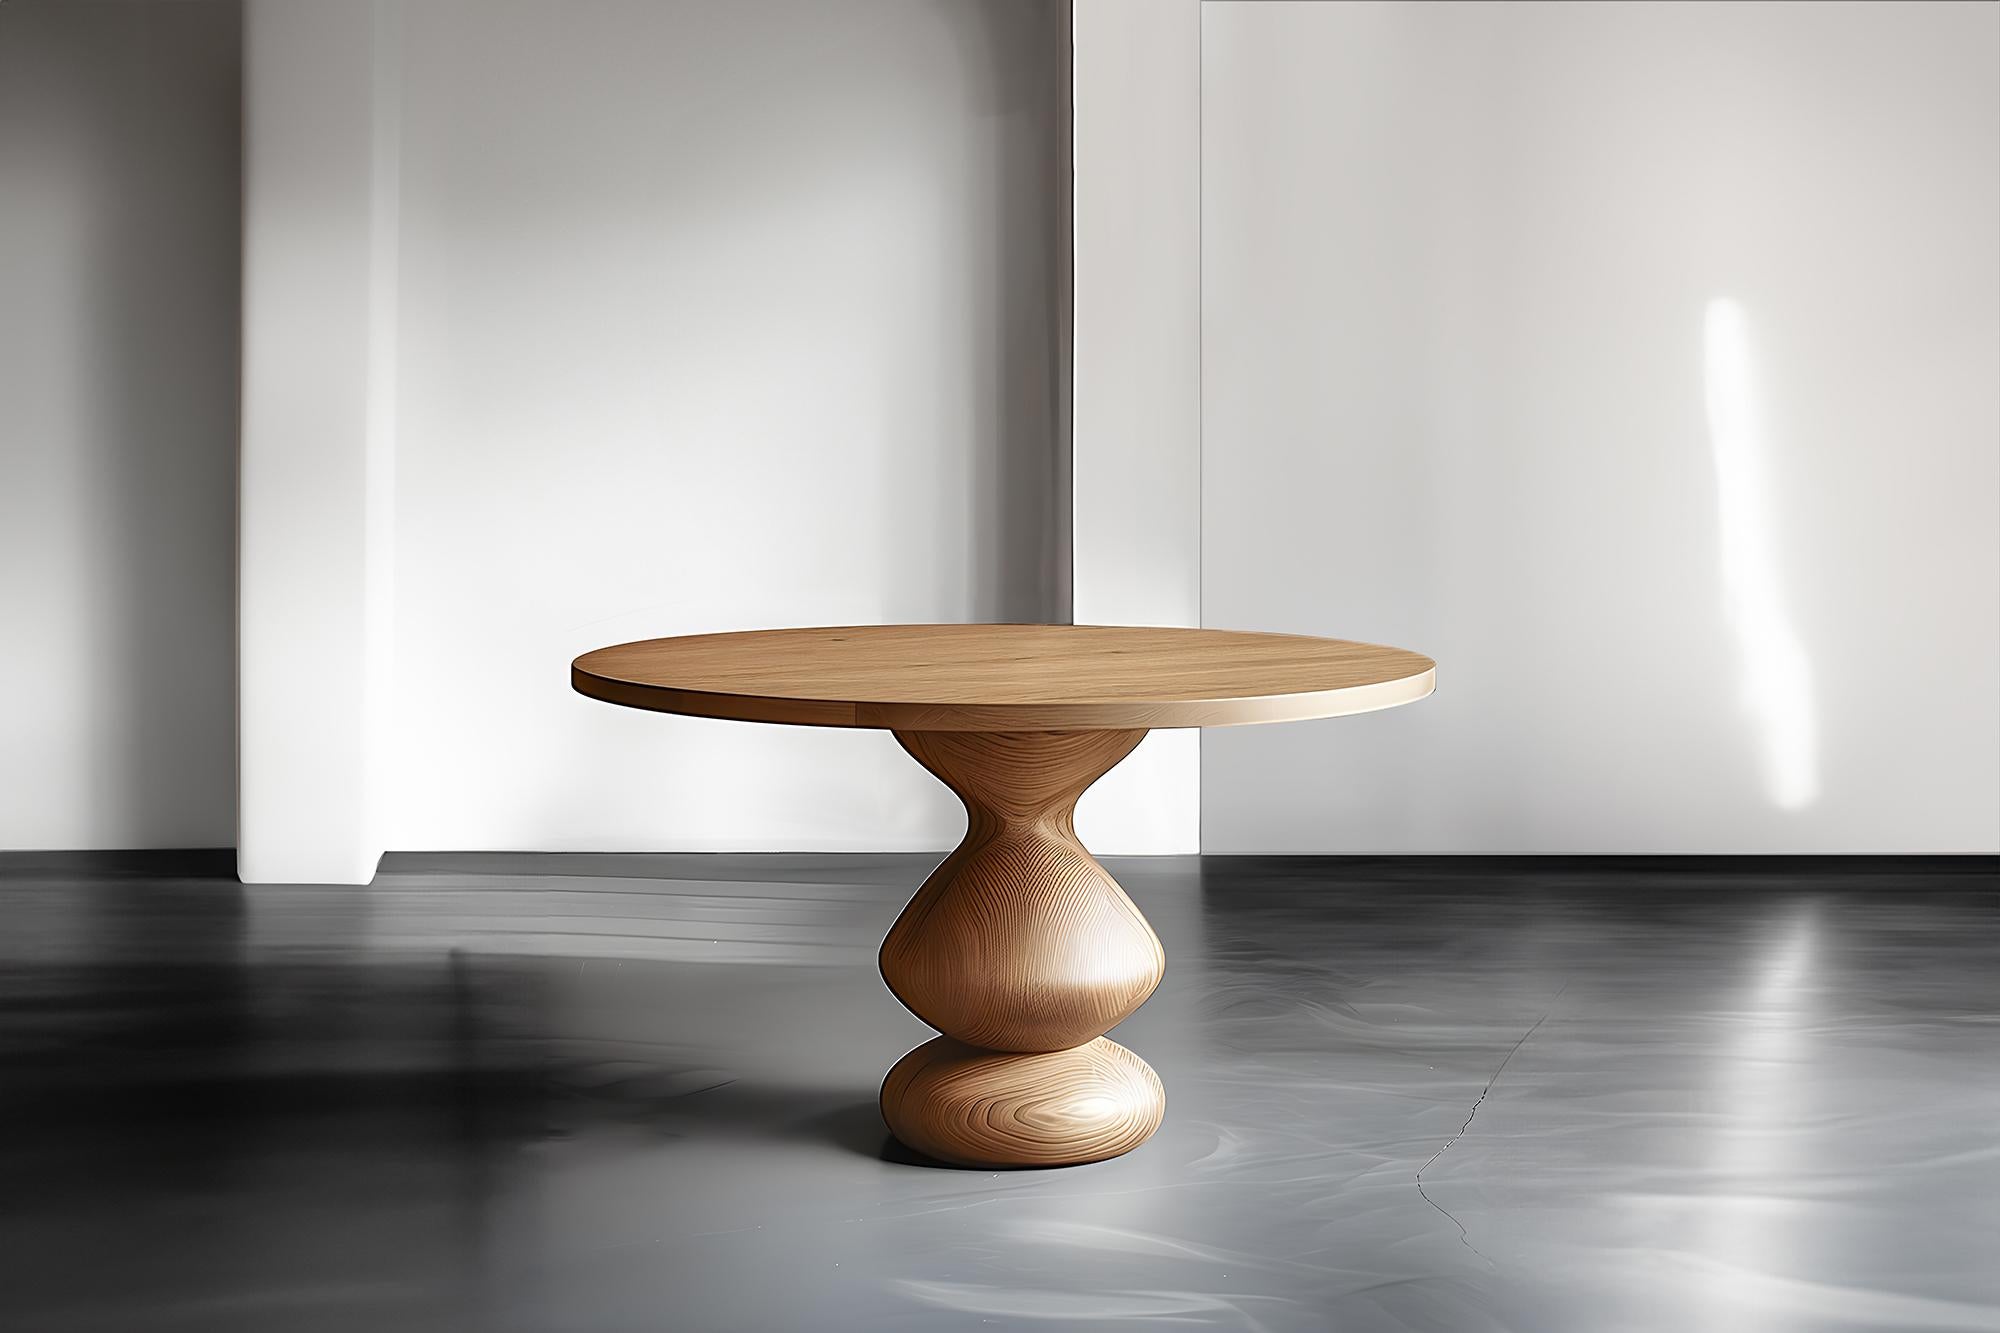 Serve with Style, Socle Serving Tables in Solid Wood by NONO No21

——

Introducing the 